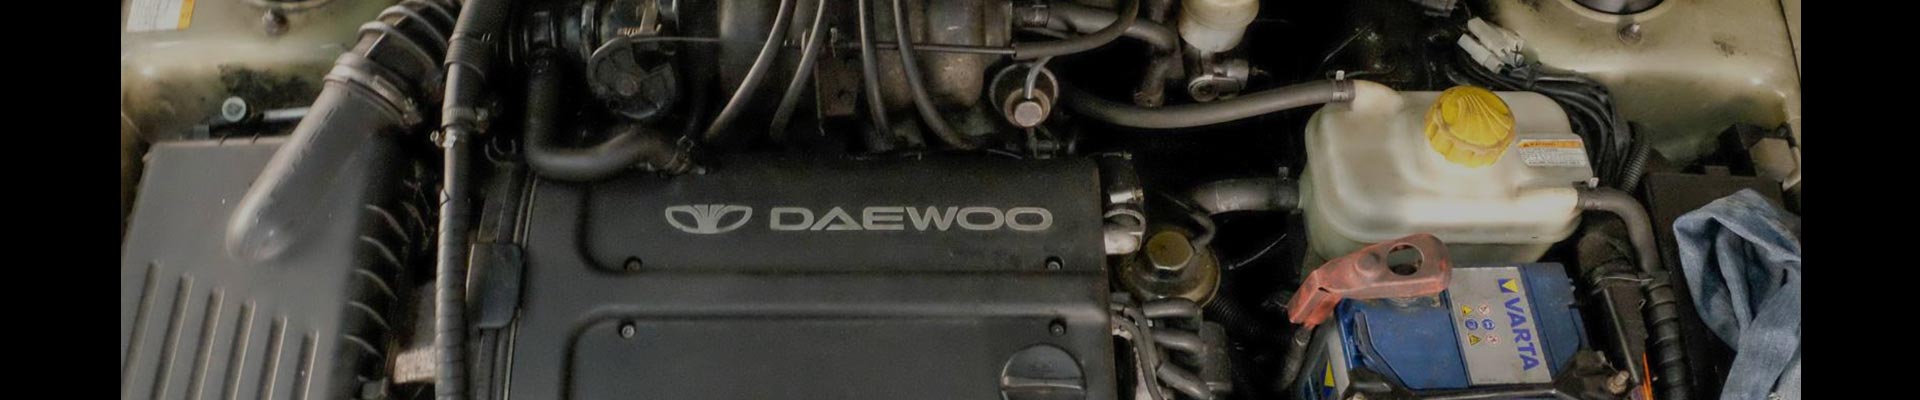 Shop Replacement 1999 Daewoo Leganza Parts with Discounted Price on the Net